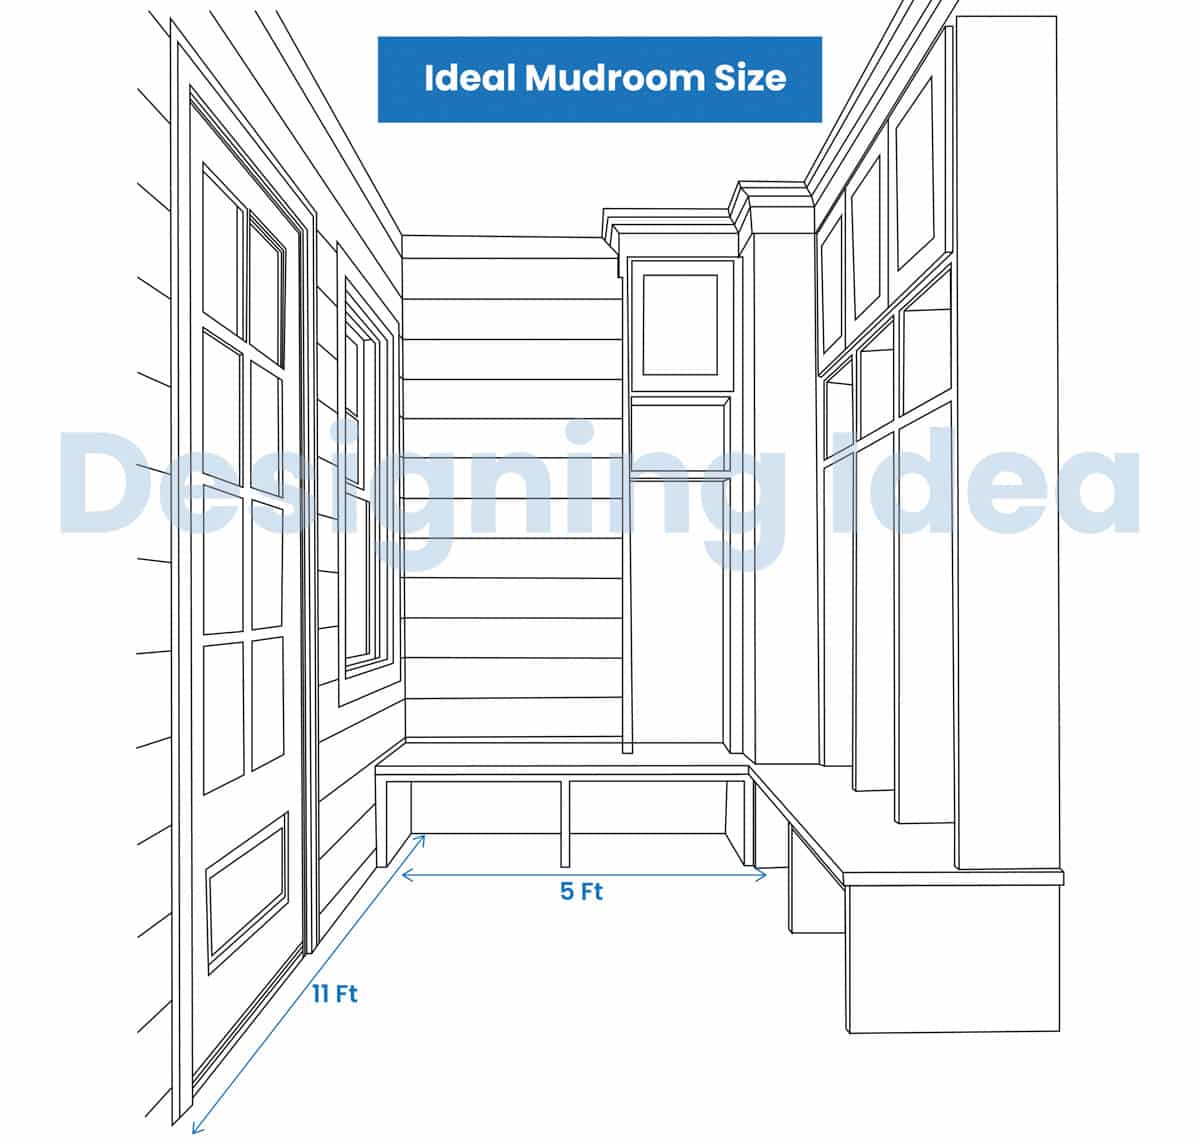 Ideal Mudroom Size